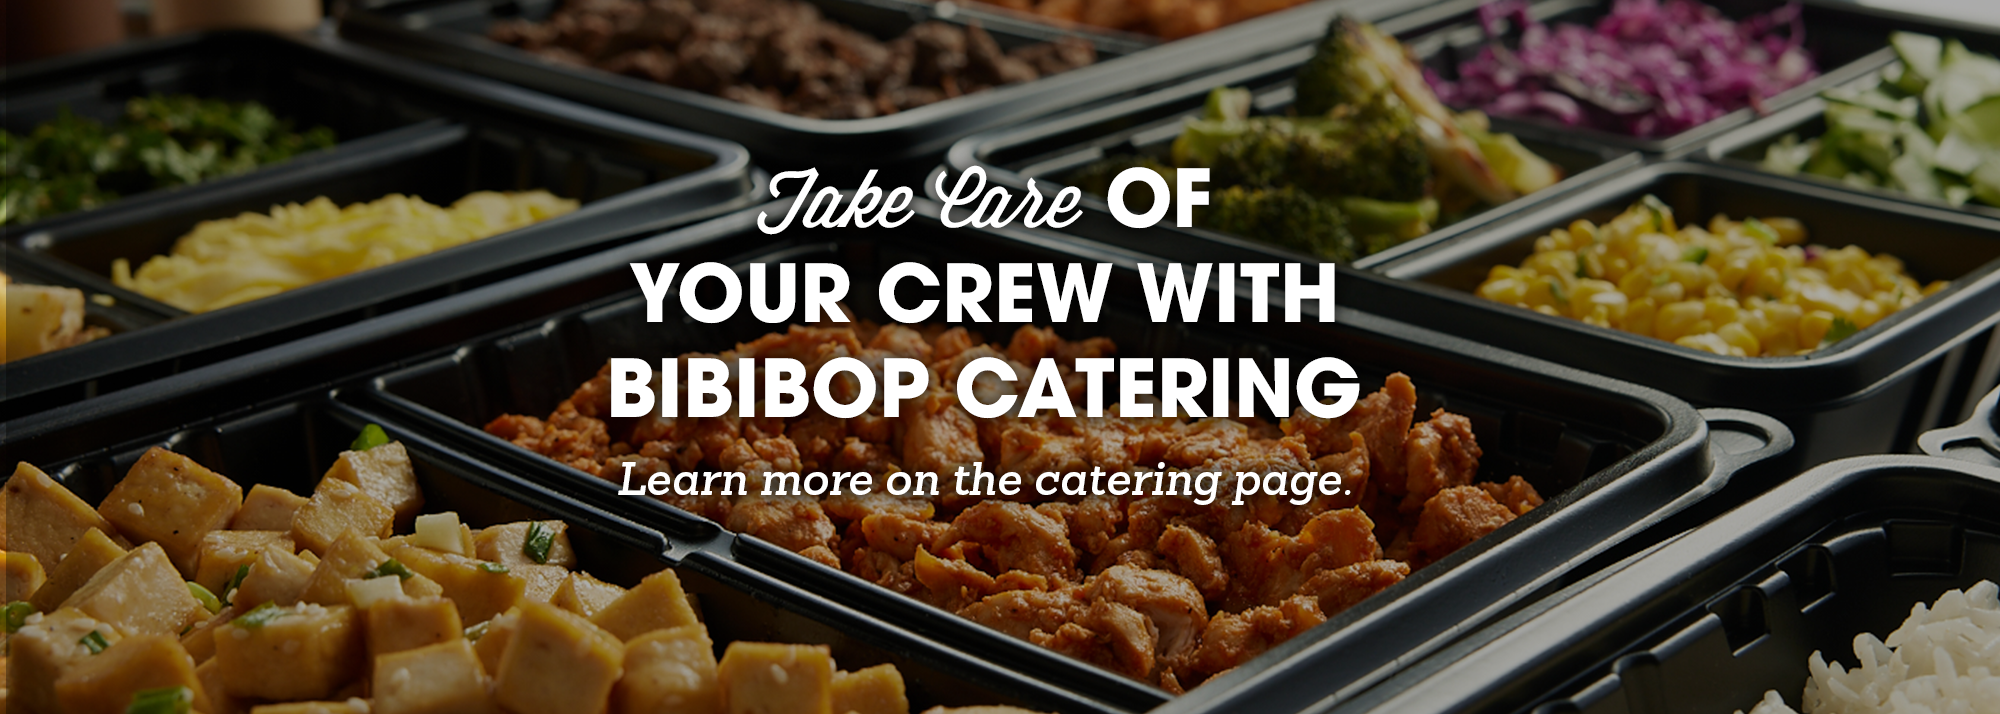 Take care of your crew with BIBIBOP Catering